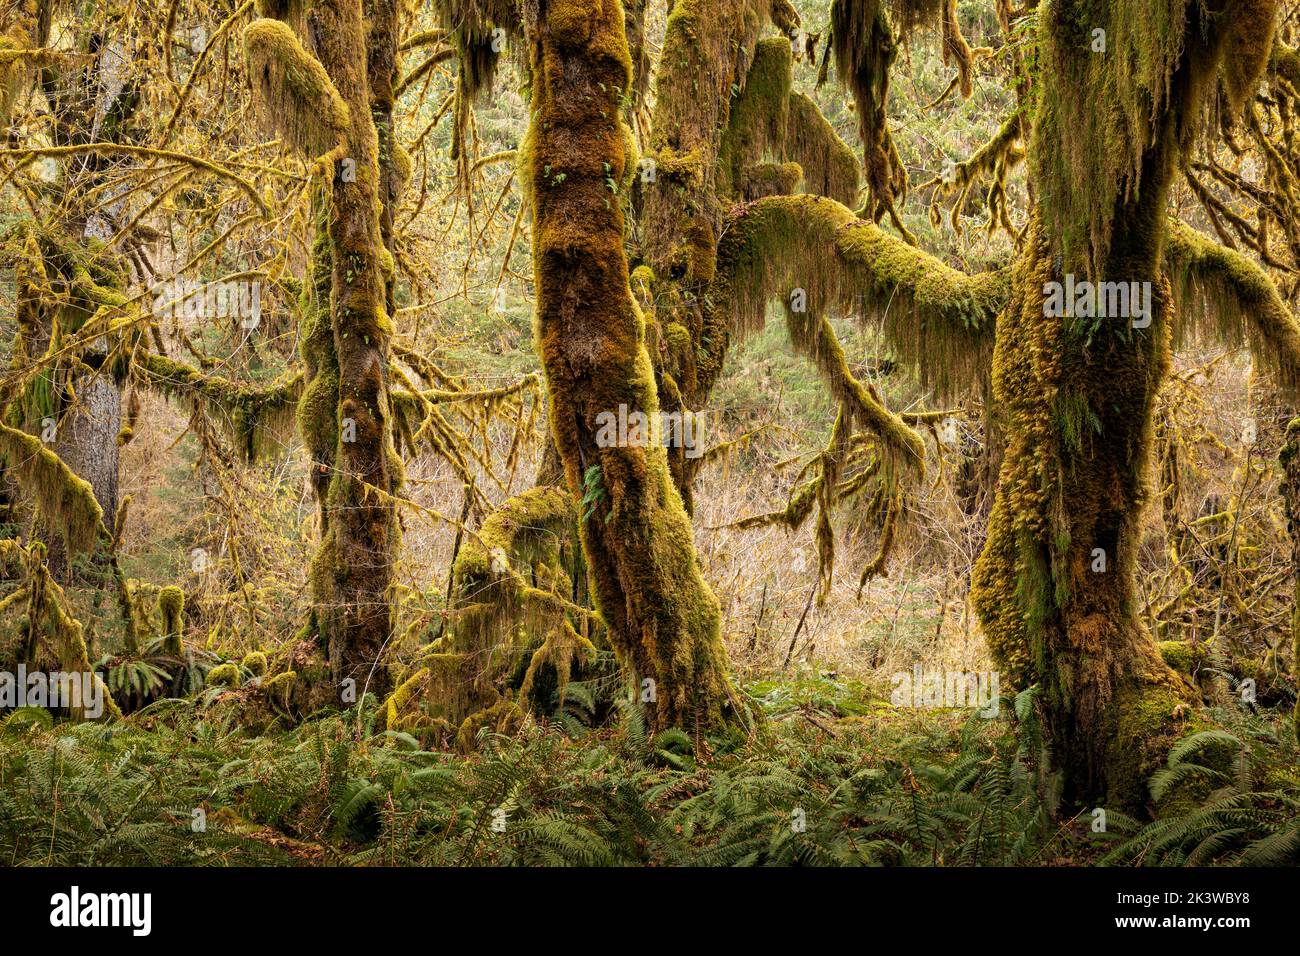 WA22093-00...WASHINGTON - Maple trees covered with moss  in the Hall of Mosses, part of the Hoh Rain Forest , In Olympic National Park. Stock Photo